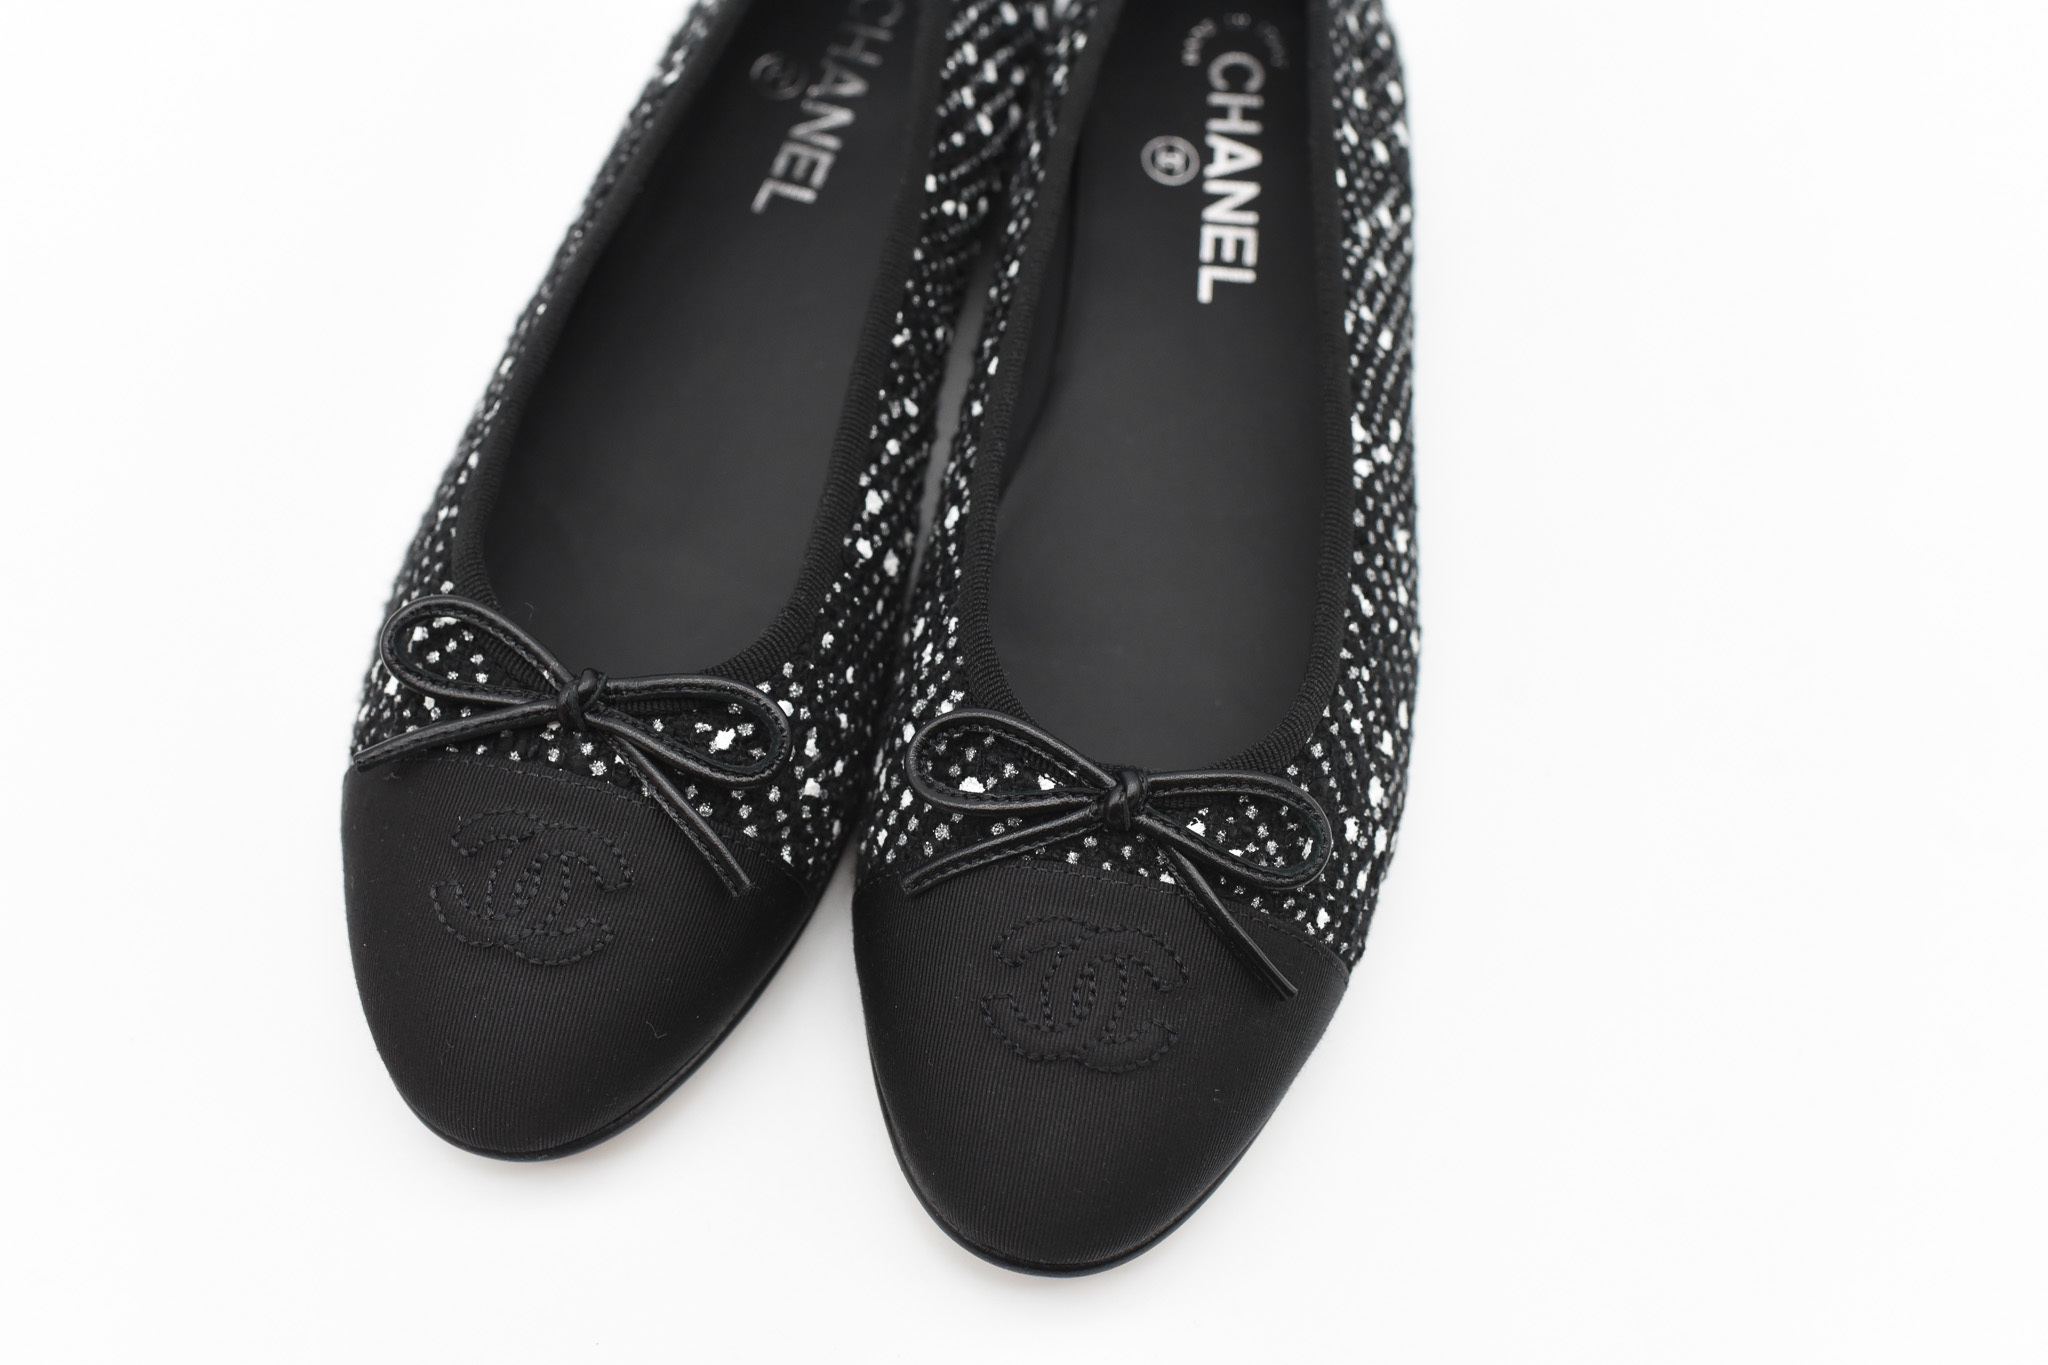 Chanel Shoes Ballet Flats, Black and White Tweed, Size 40, New in Box GA006